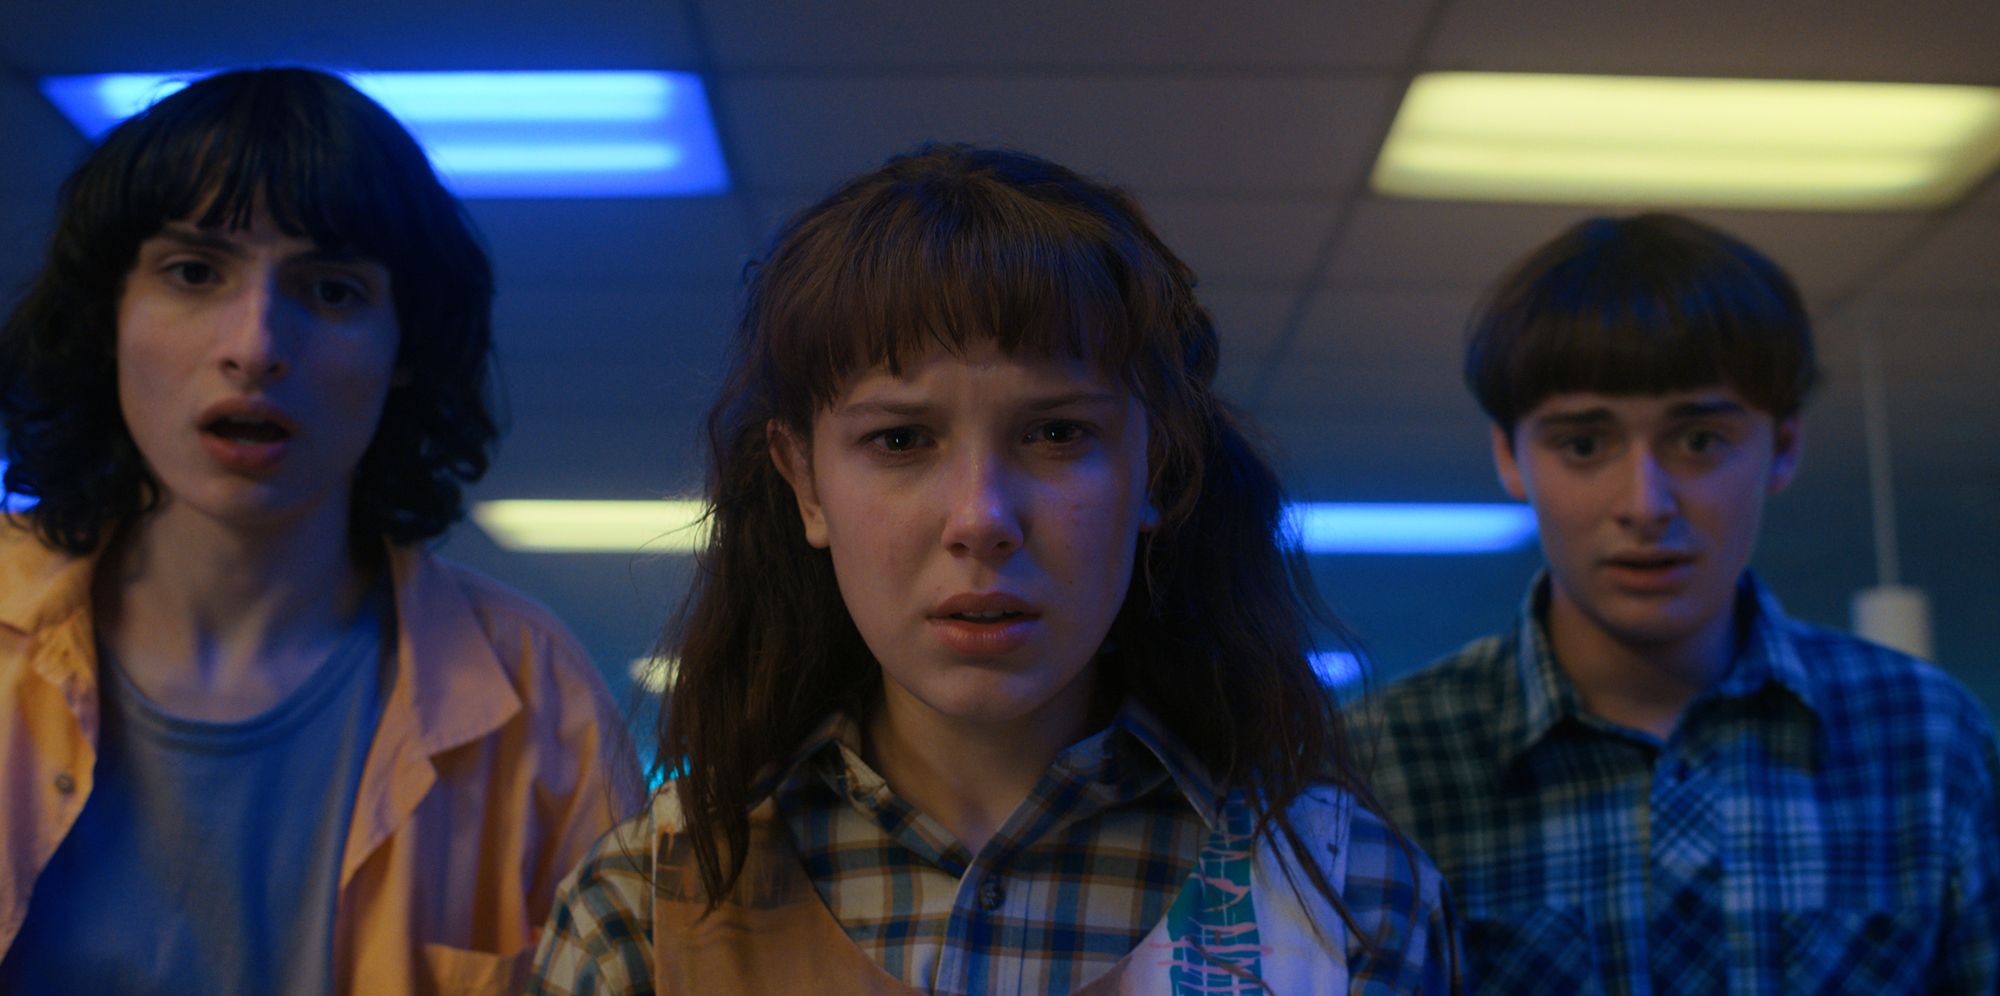 Vol. 1 of Stranger Things' two-part 4th season is dark, twisted, and  utterly brilliant